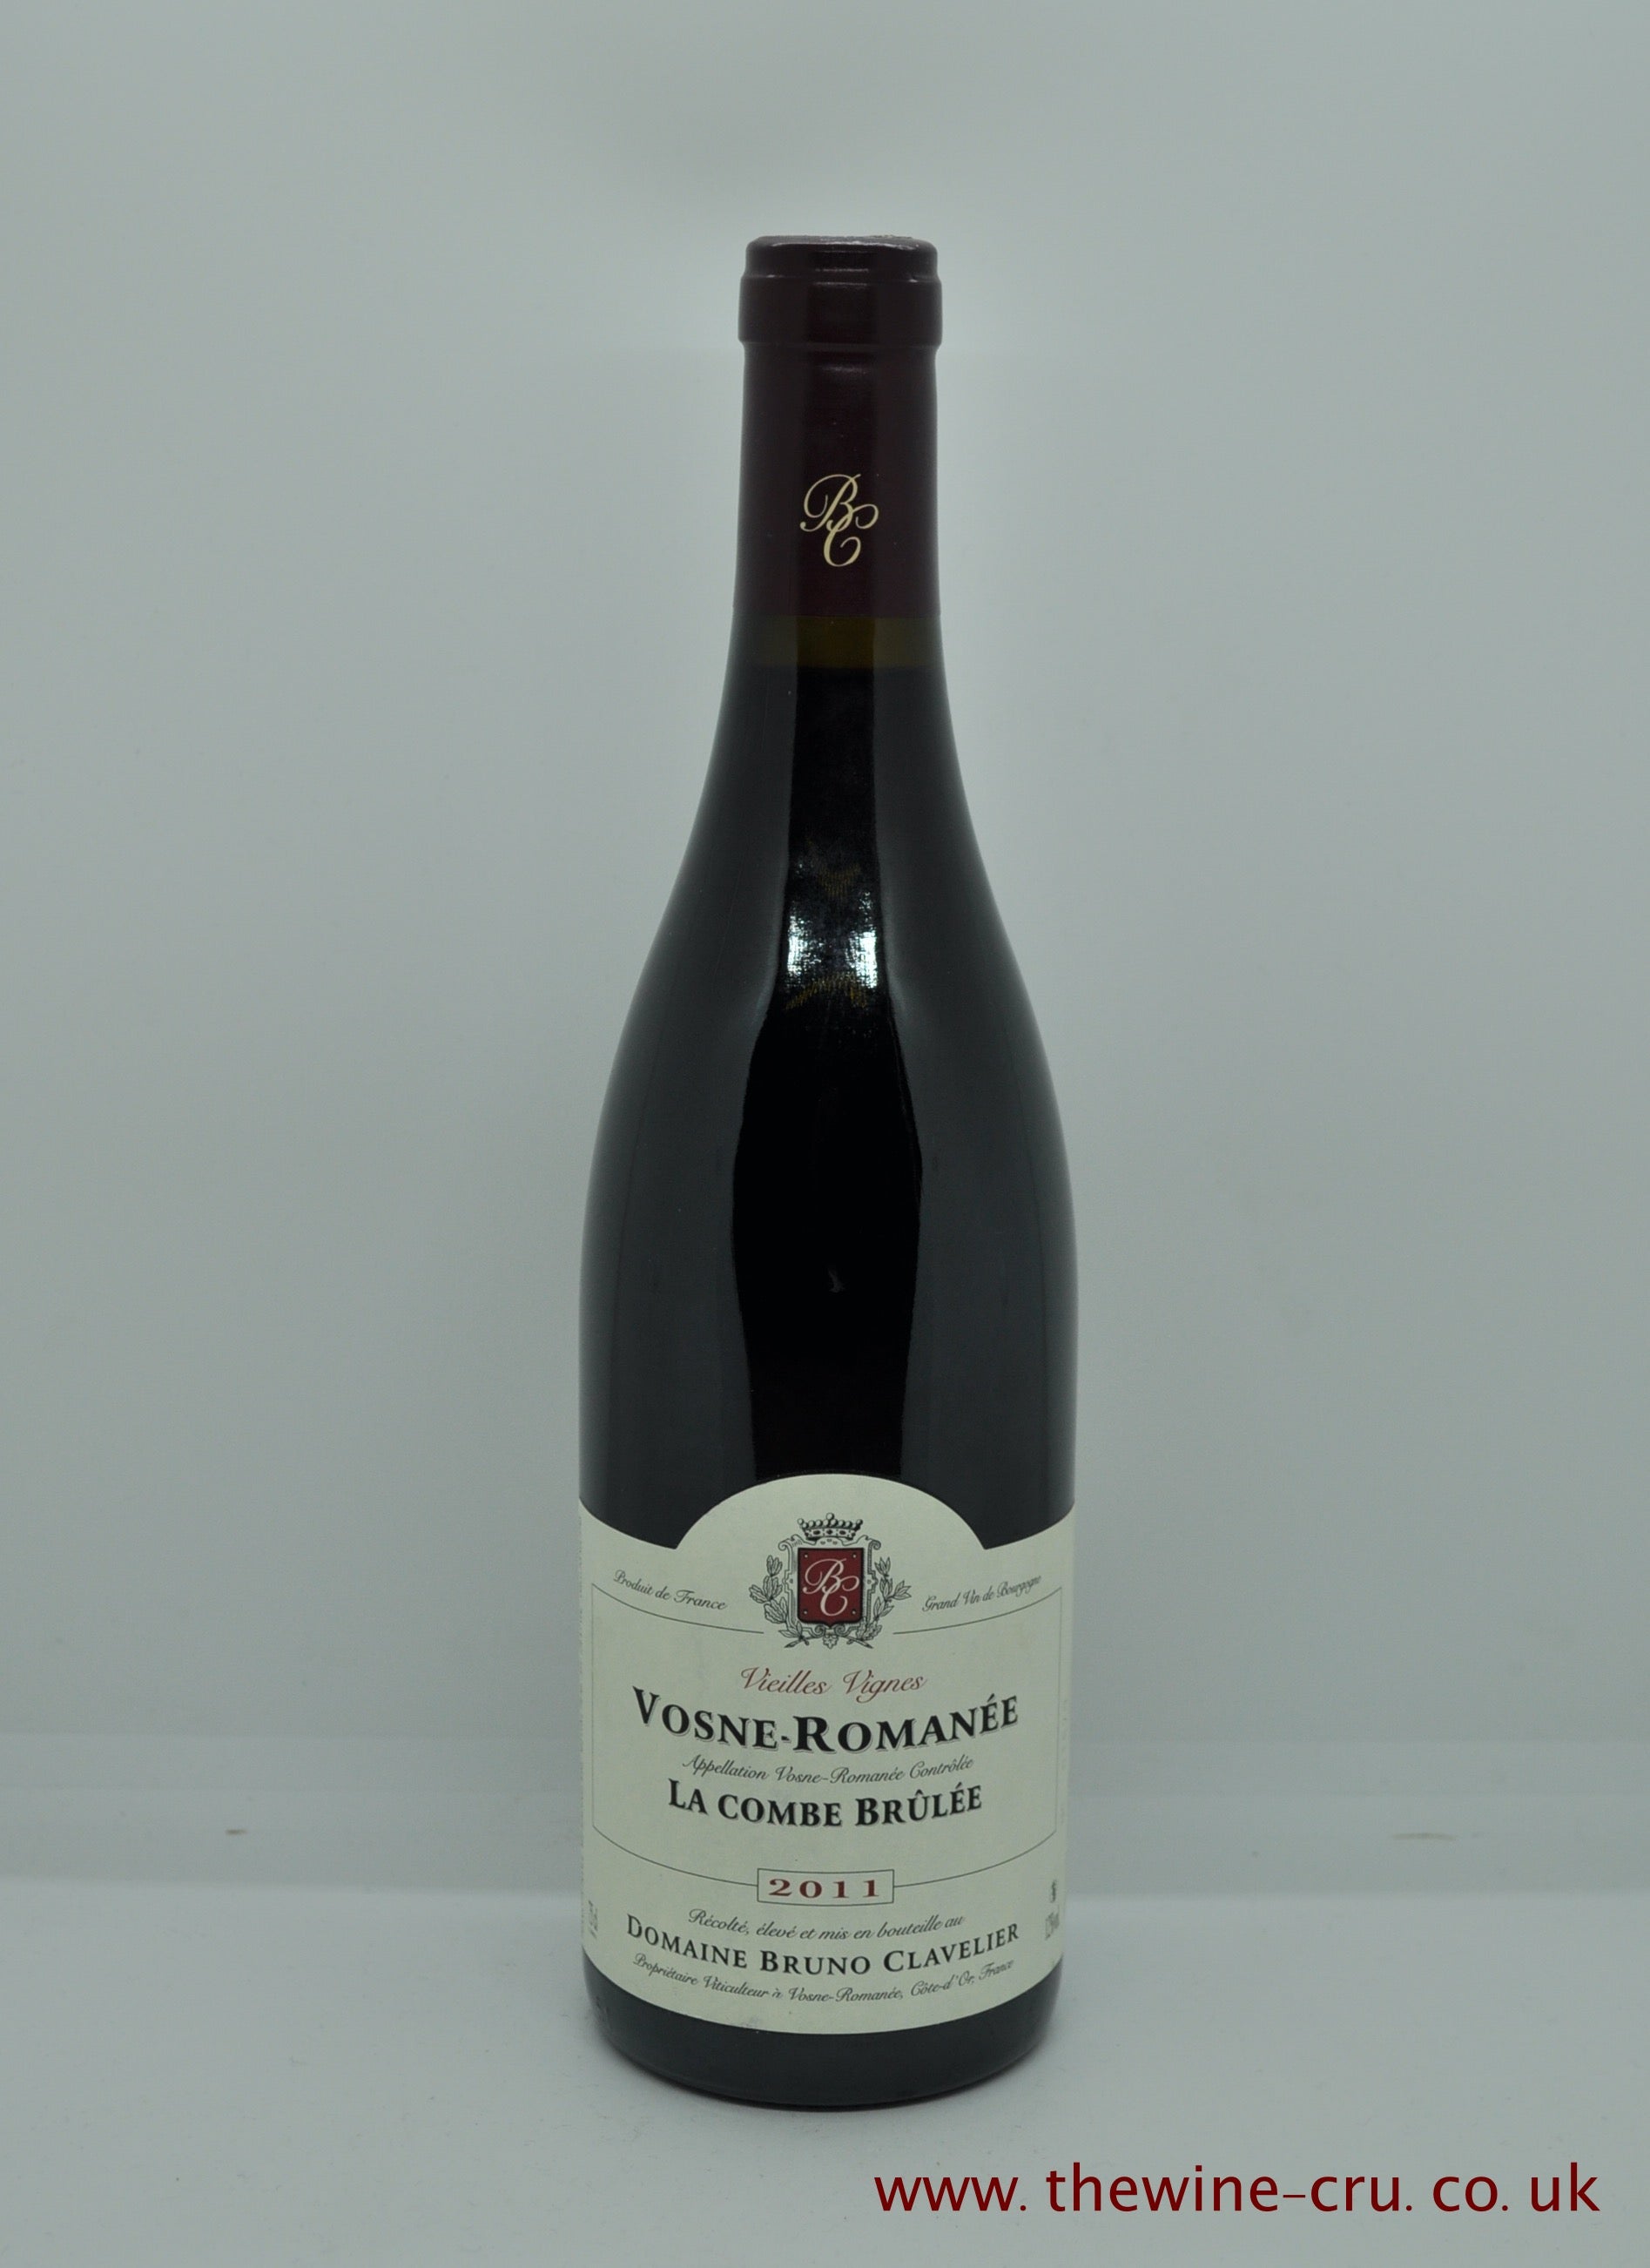 A bottle of 2011 vintage red wine. Vosne-Romanee La Combe Brulee Domaine Bruno Claverier 2011. france Burgundy. The bottle is in very good condition. Immediate delivery. Free local delivery. Gift wrapping available.